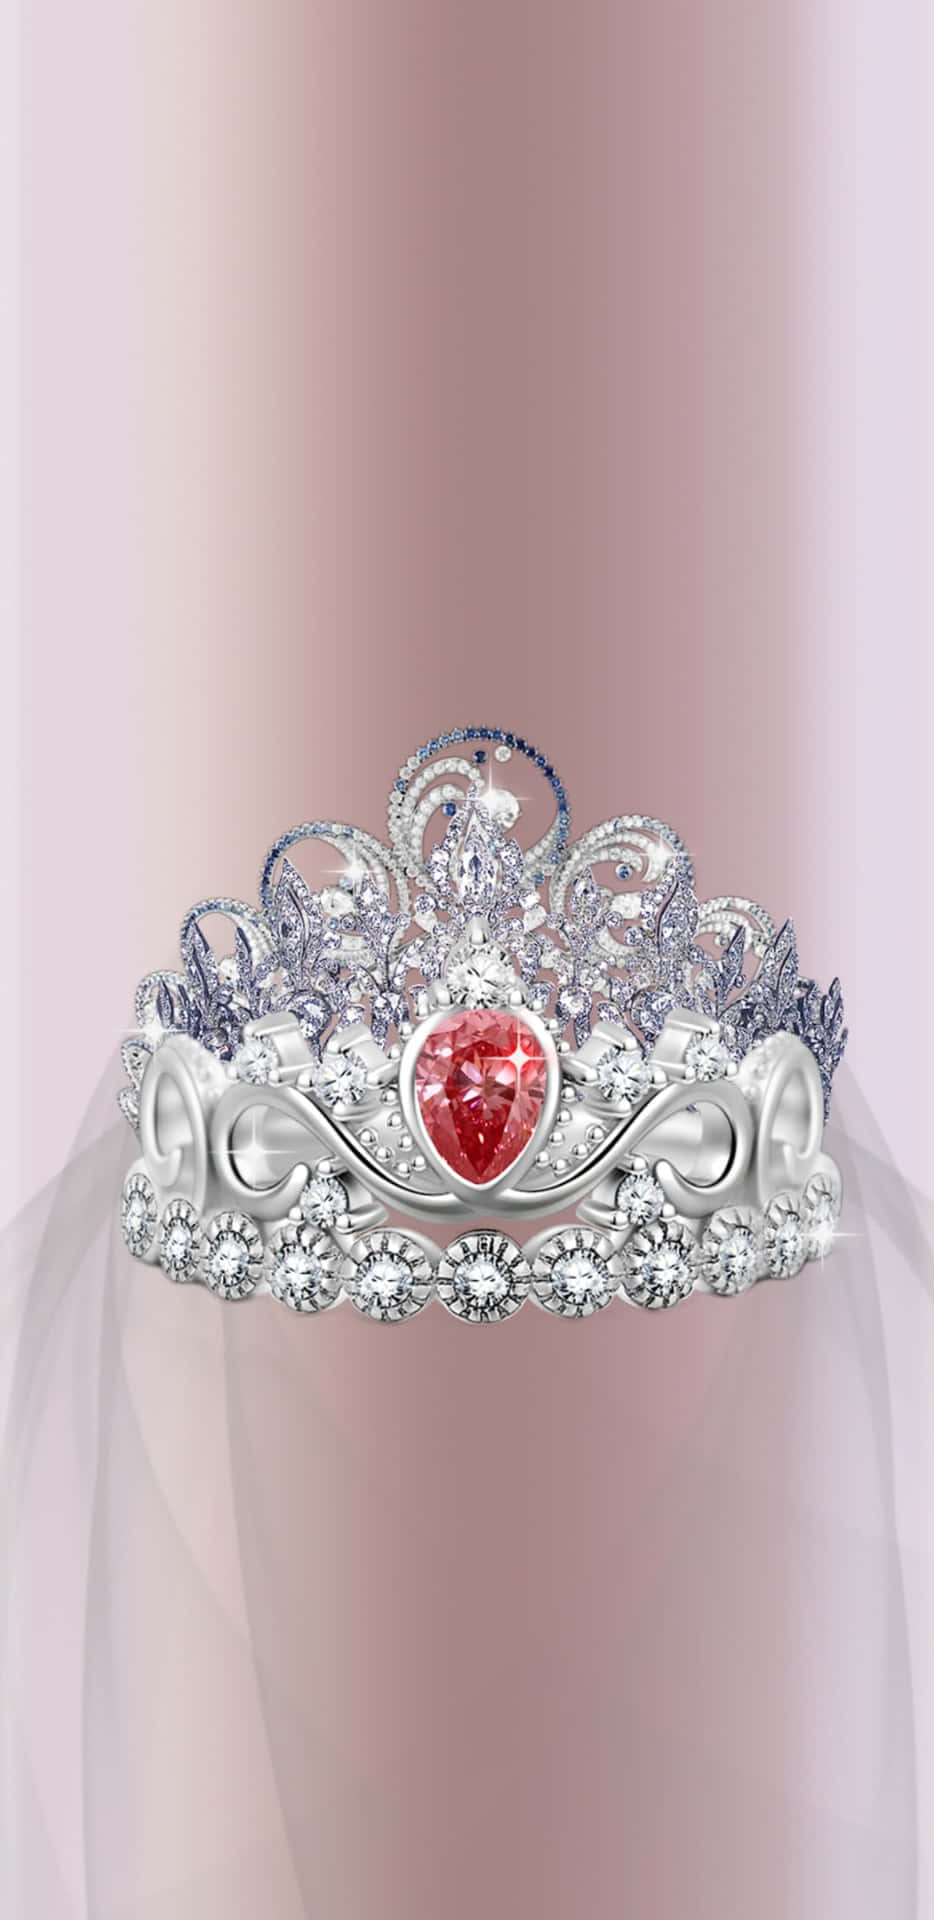 A Tiara With A Red Heart And Diamonds Background